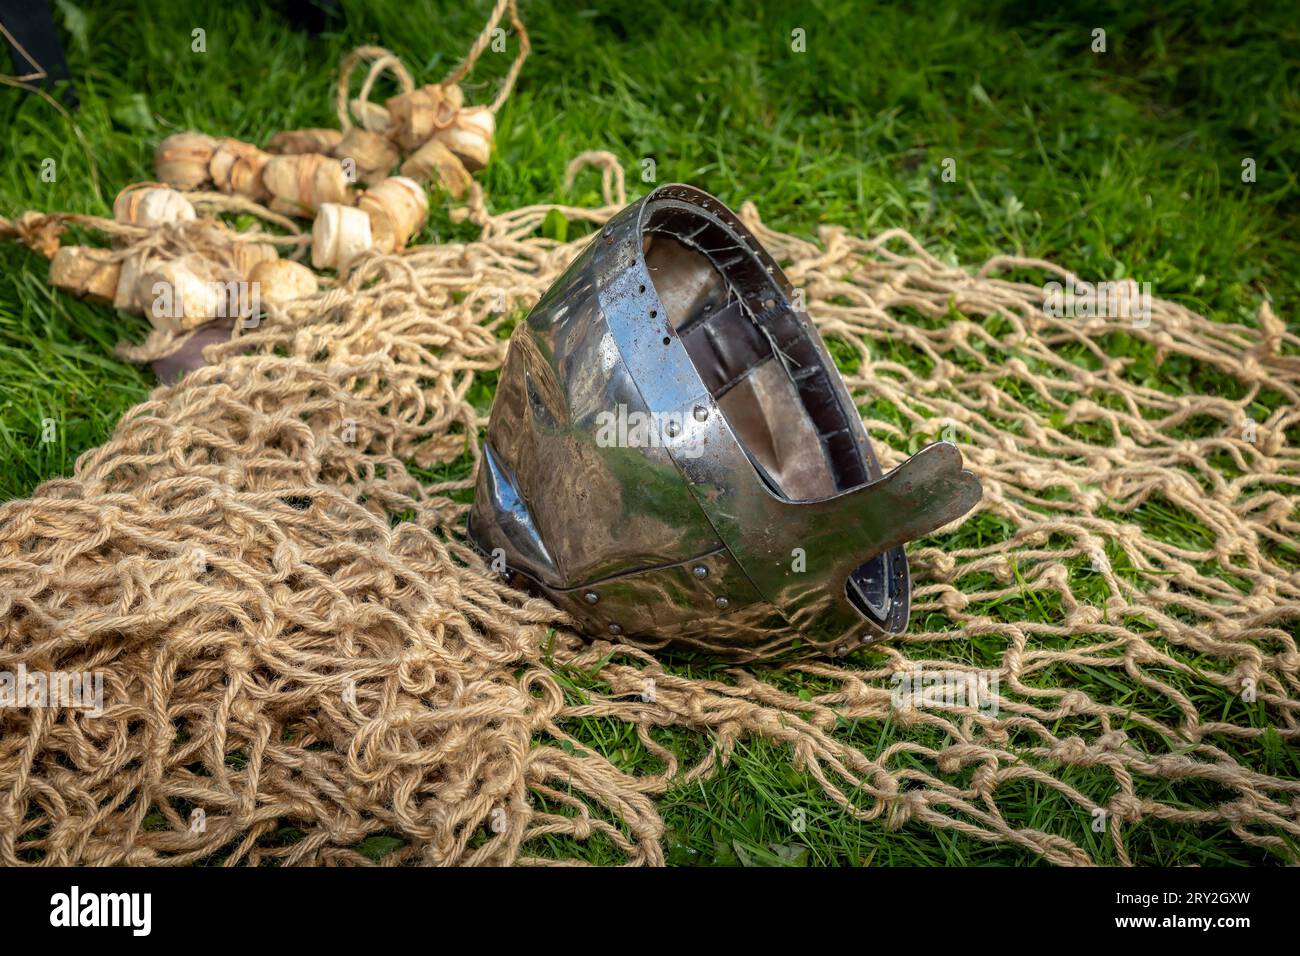 Viking nasal helmet on fishing nets celebrating 1100 years of the ancient “cyty” of Thelwall Stock Photo